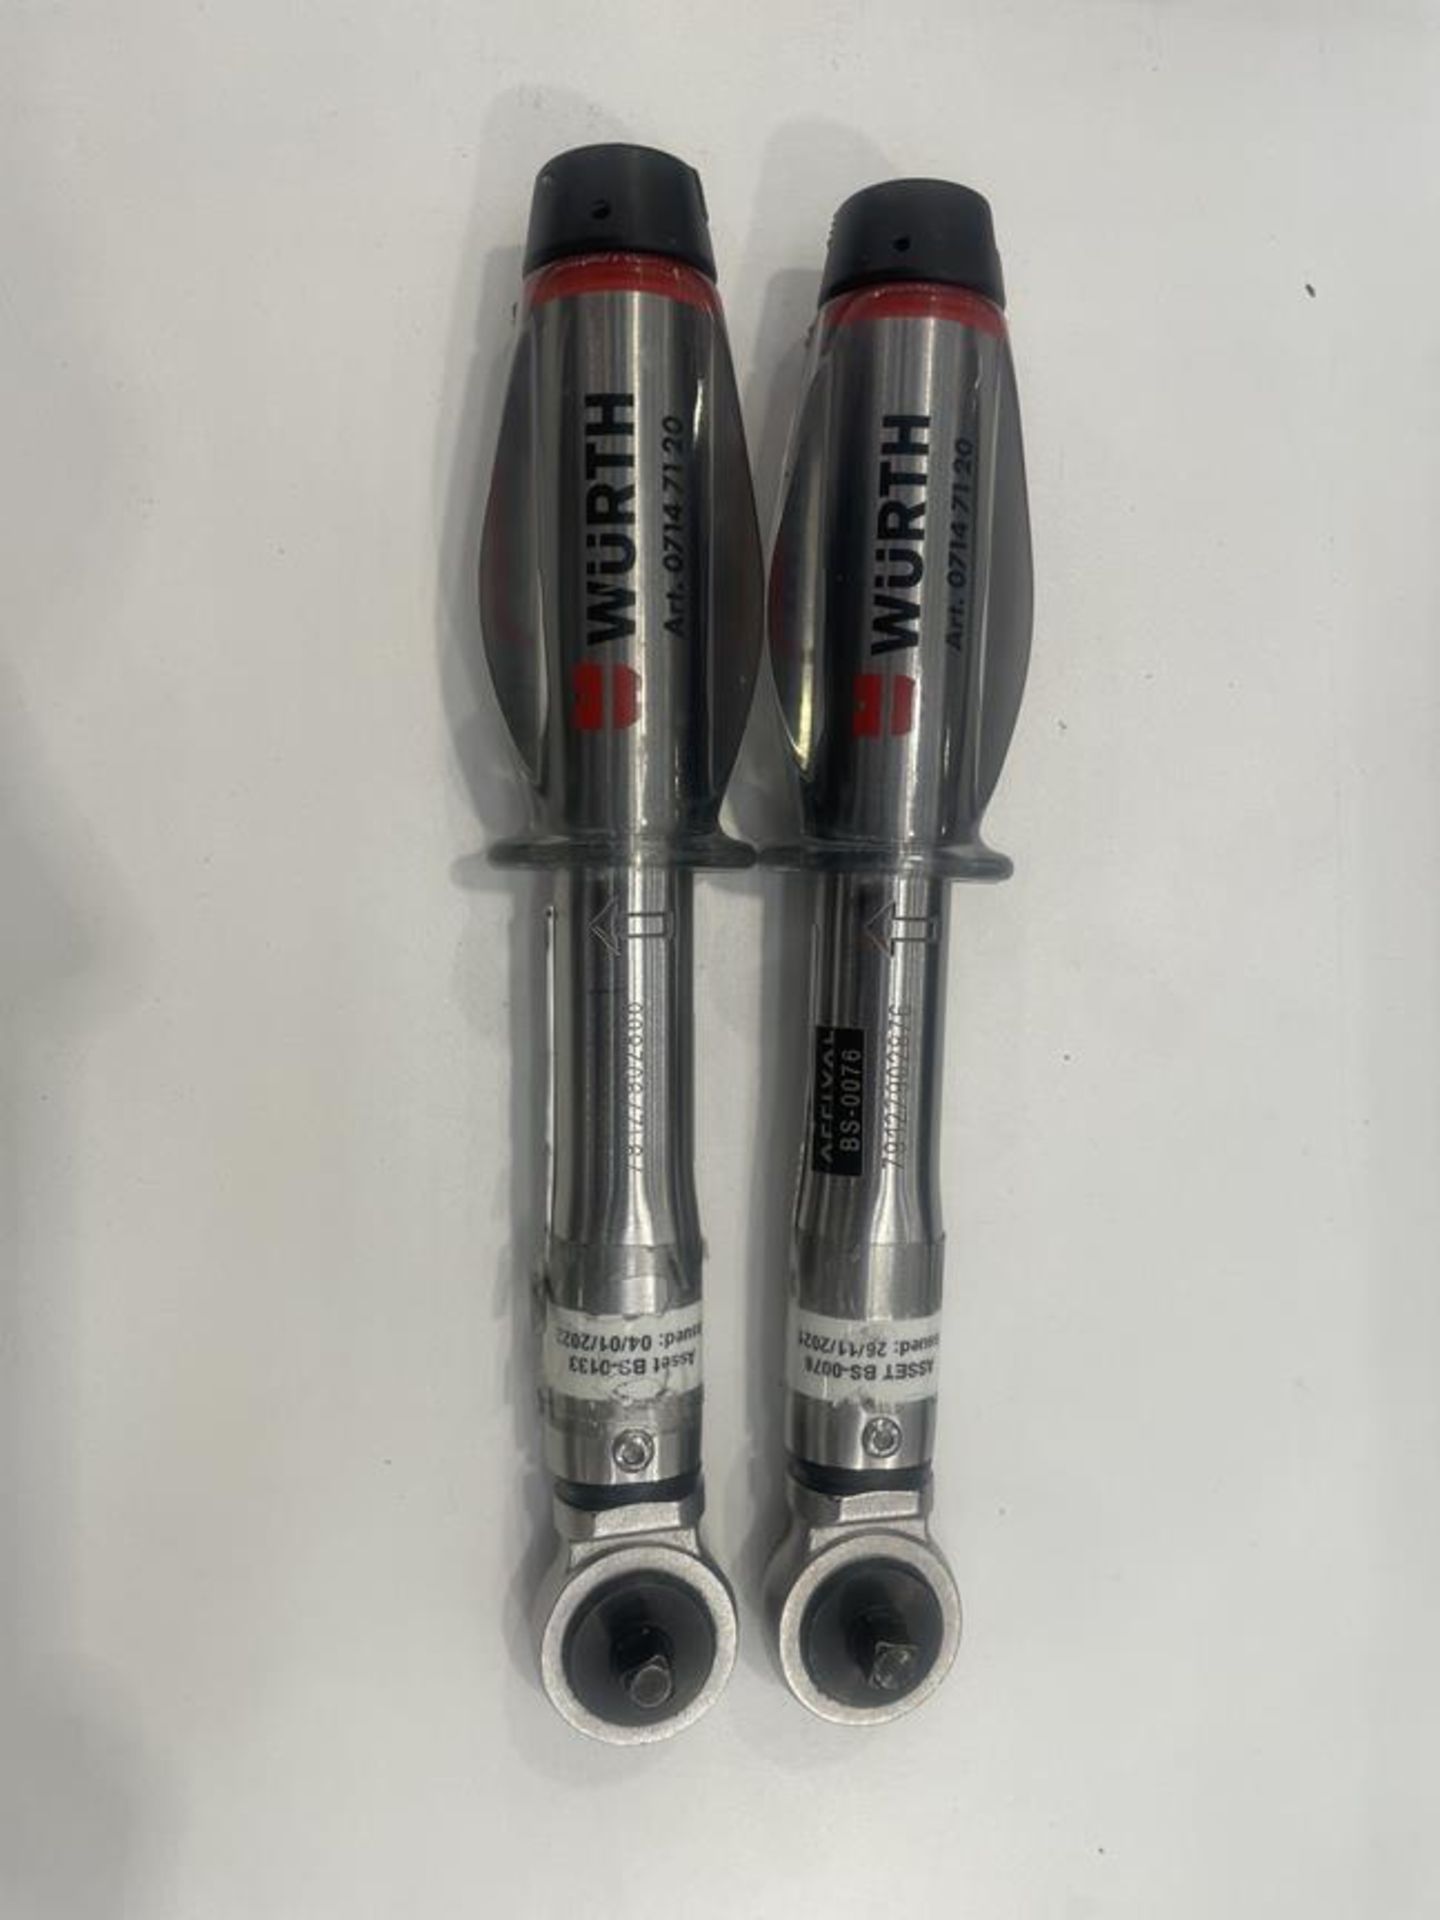 2x (no.) Wurth, ¼" torque wrench, 4-20 N-M - Image 2 of 2